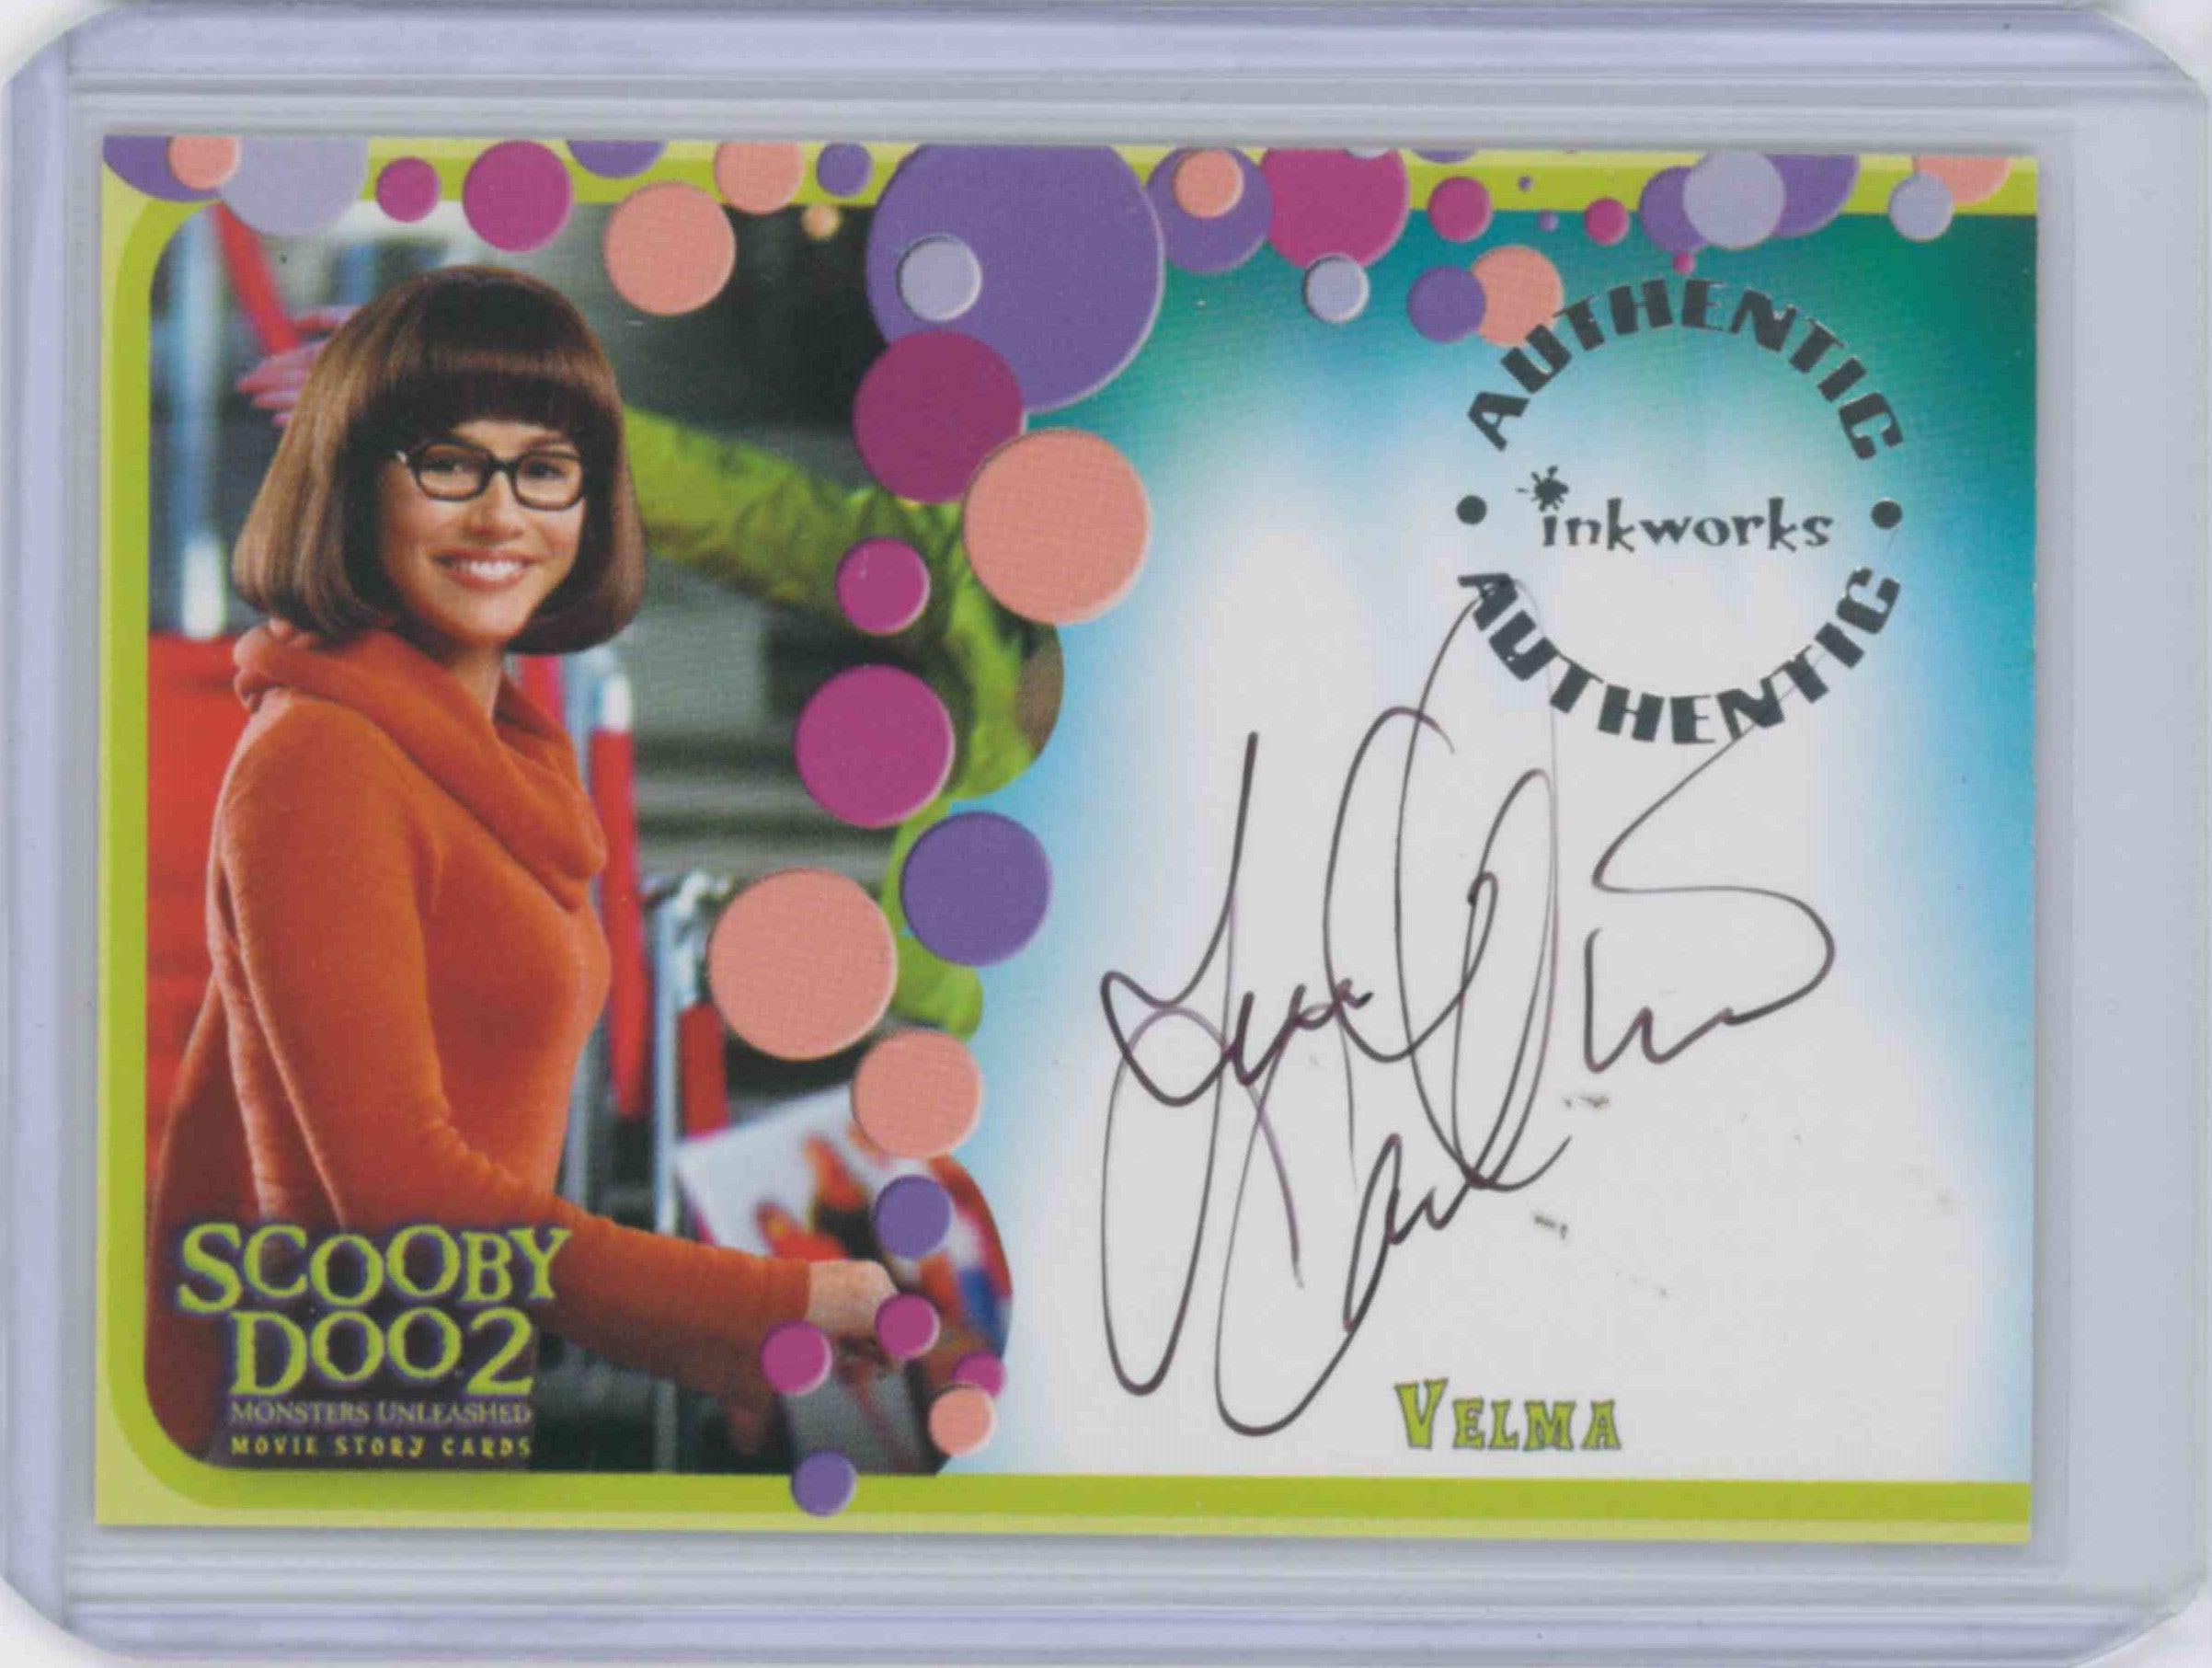 SCOOBY DOO 2 MONSTERS UNLEASHED AUTOGRAPH SIGNED #A02 LINDA CARDELLINI / VELMA - Kings Comics